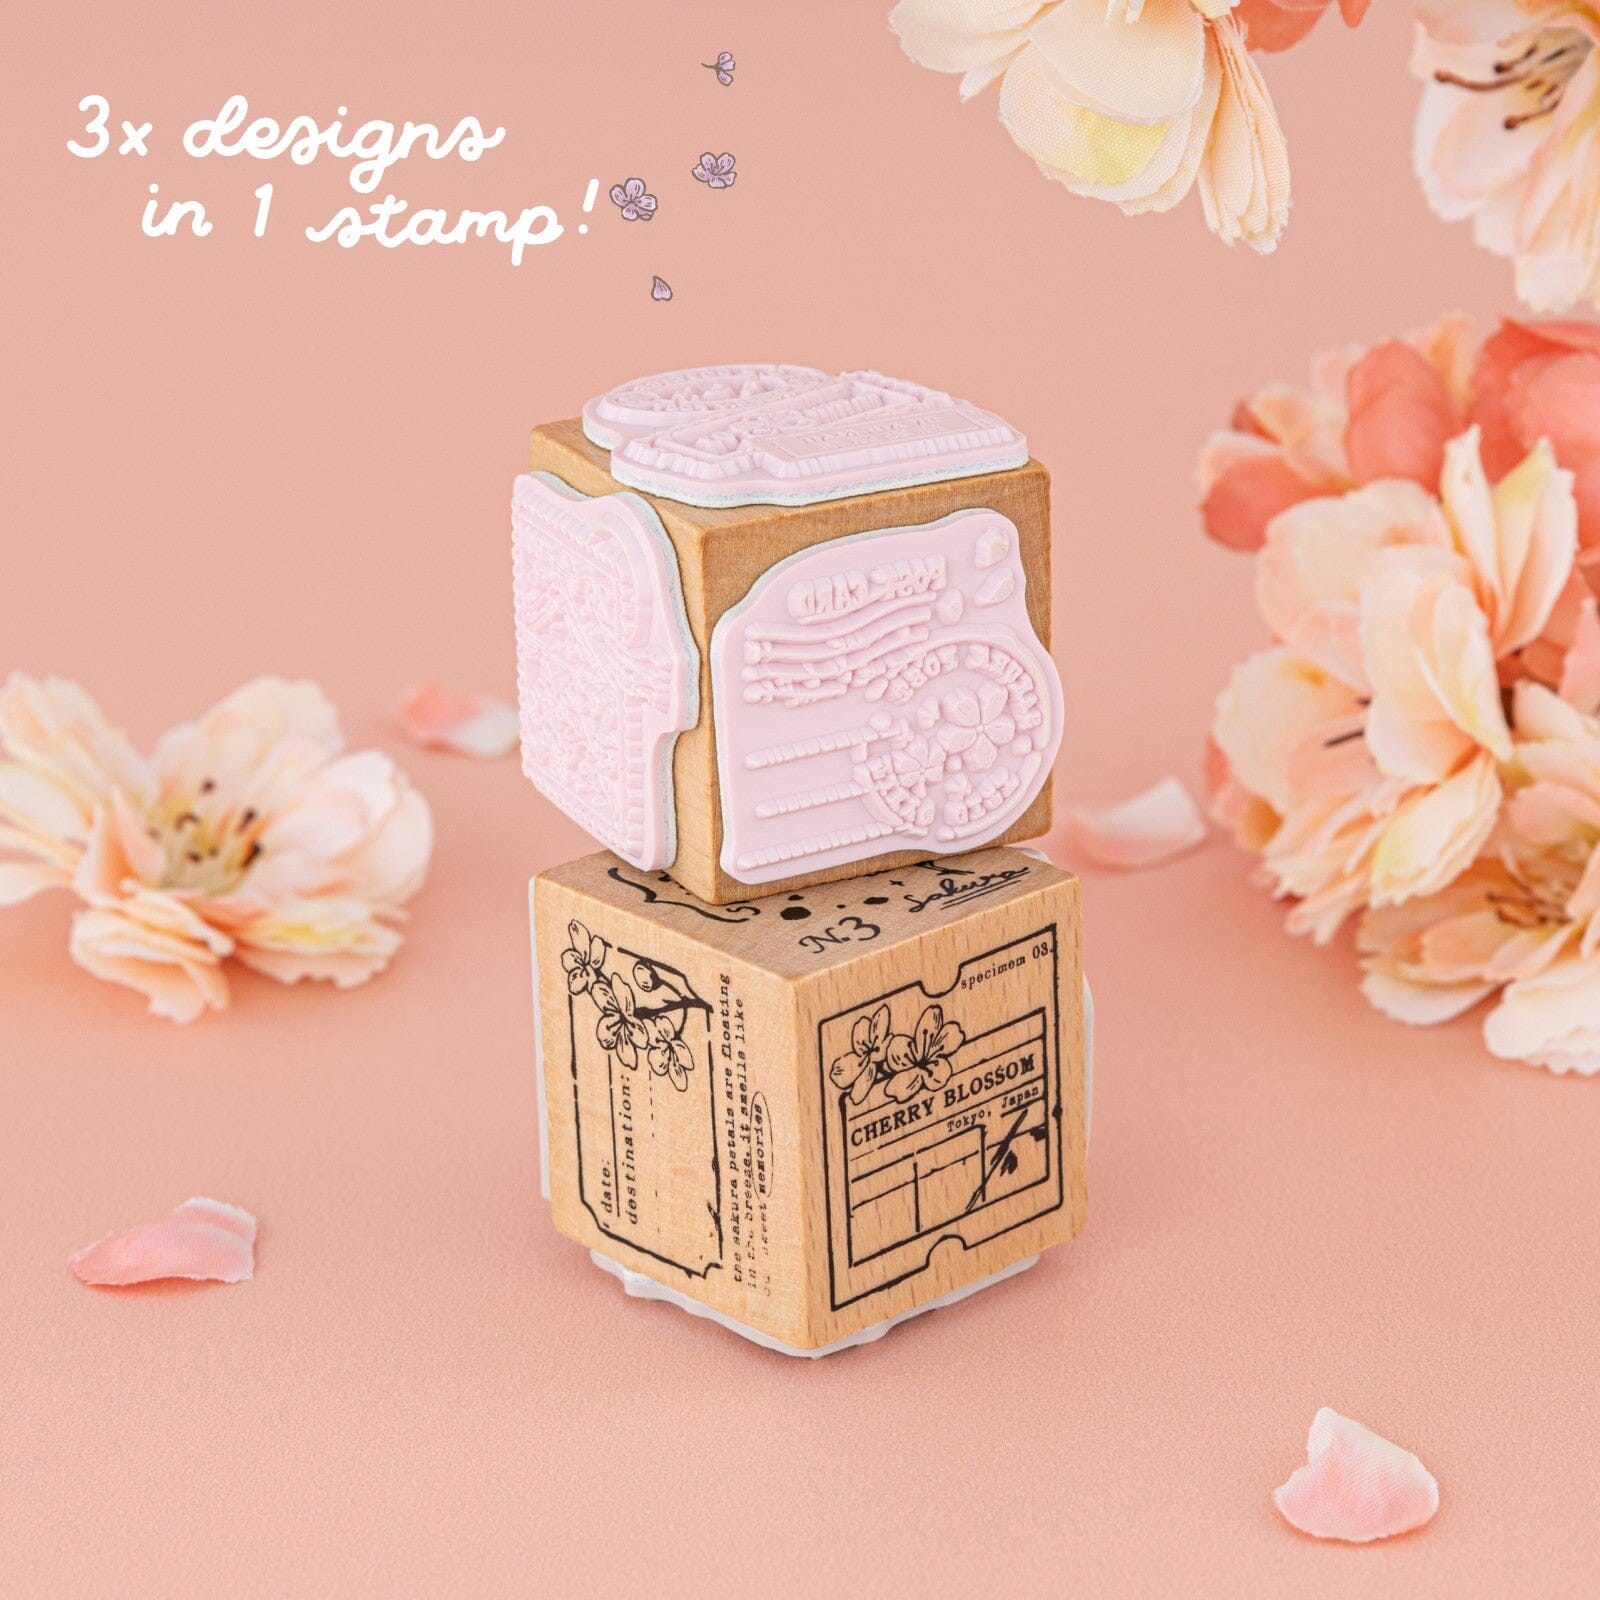 2x dice stamp with cherry blossom designs and text “3x designs in 1 stamp”